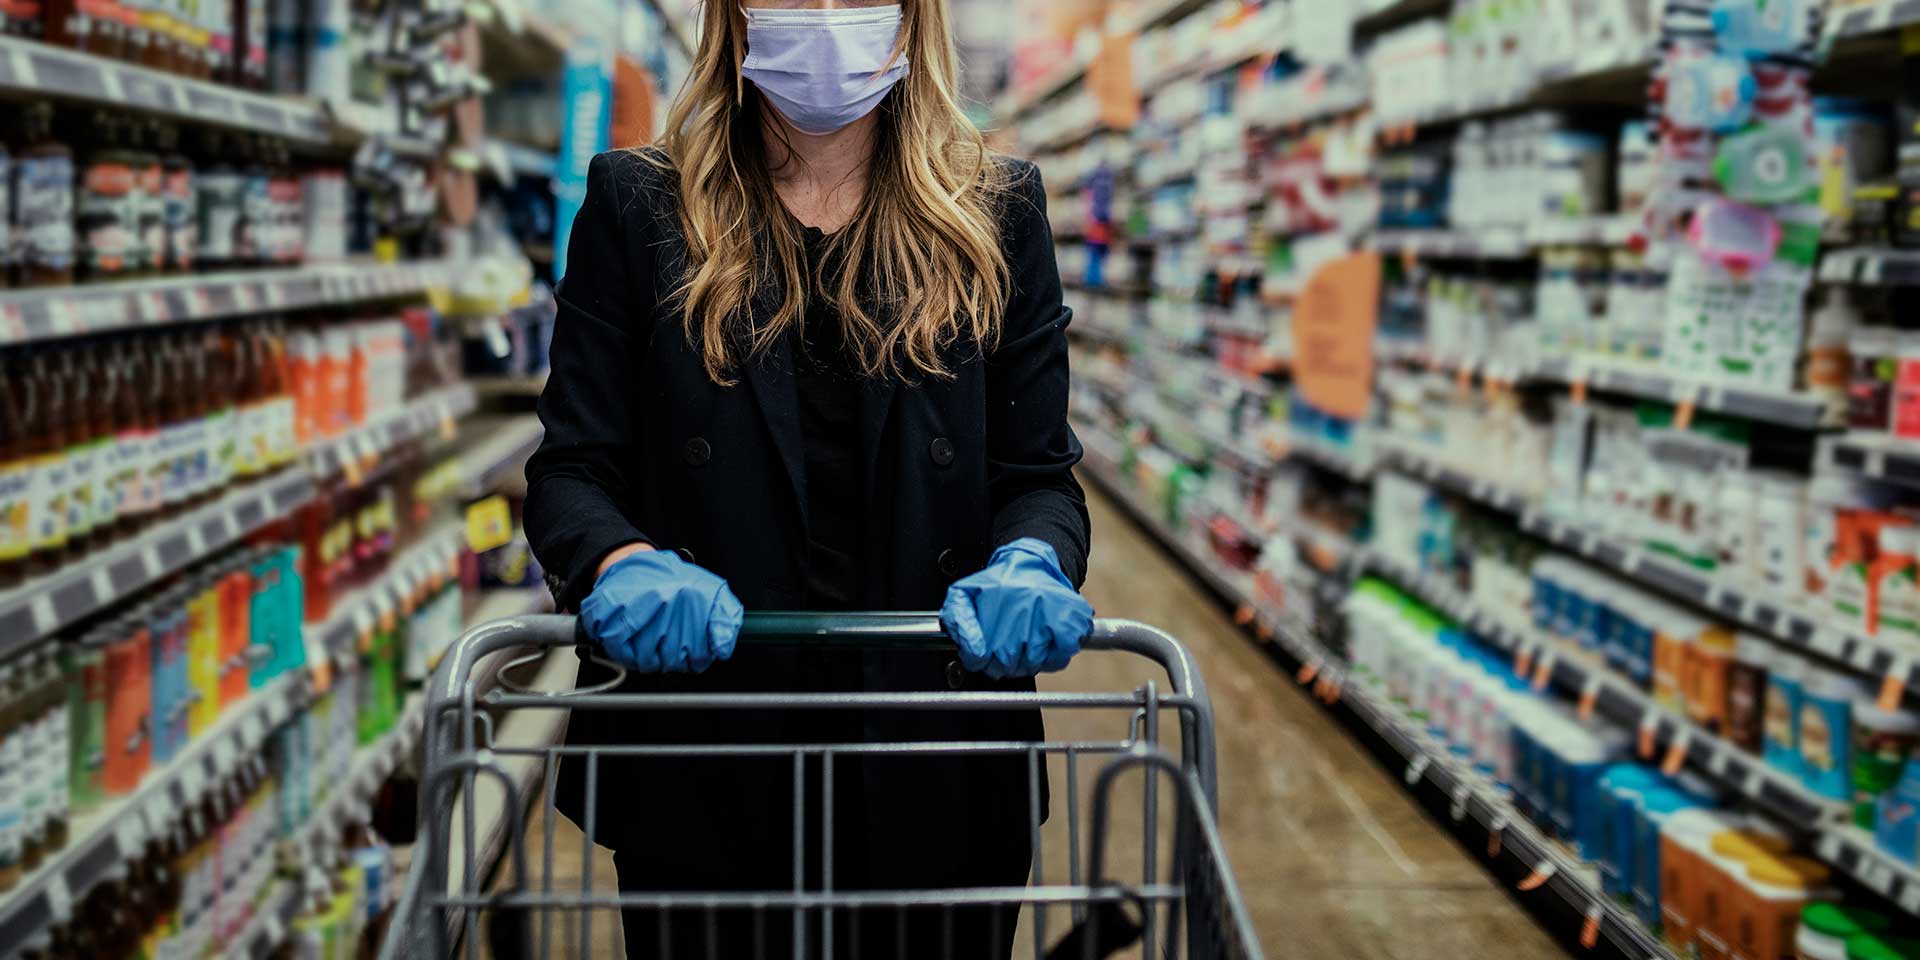 Woman wearing face mask in grocery store